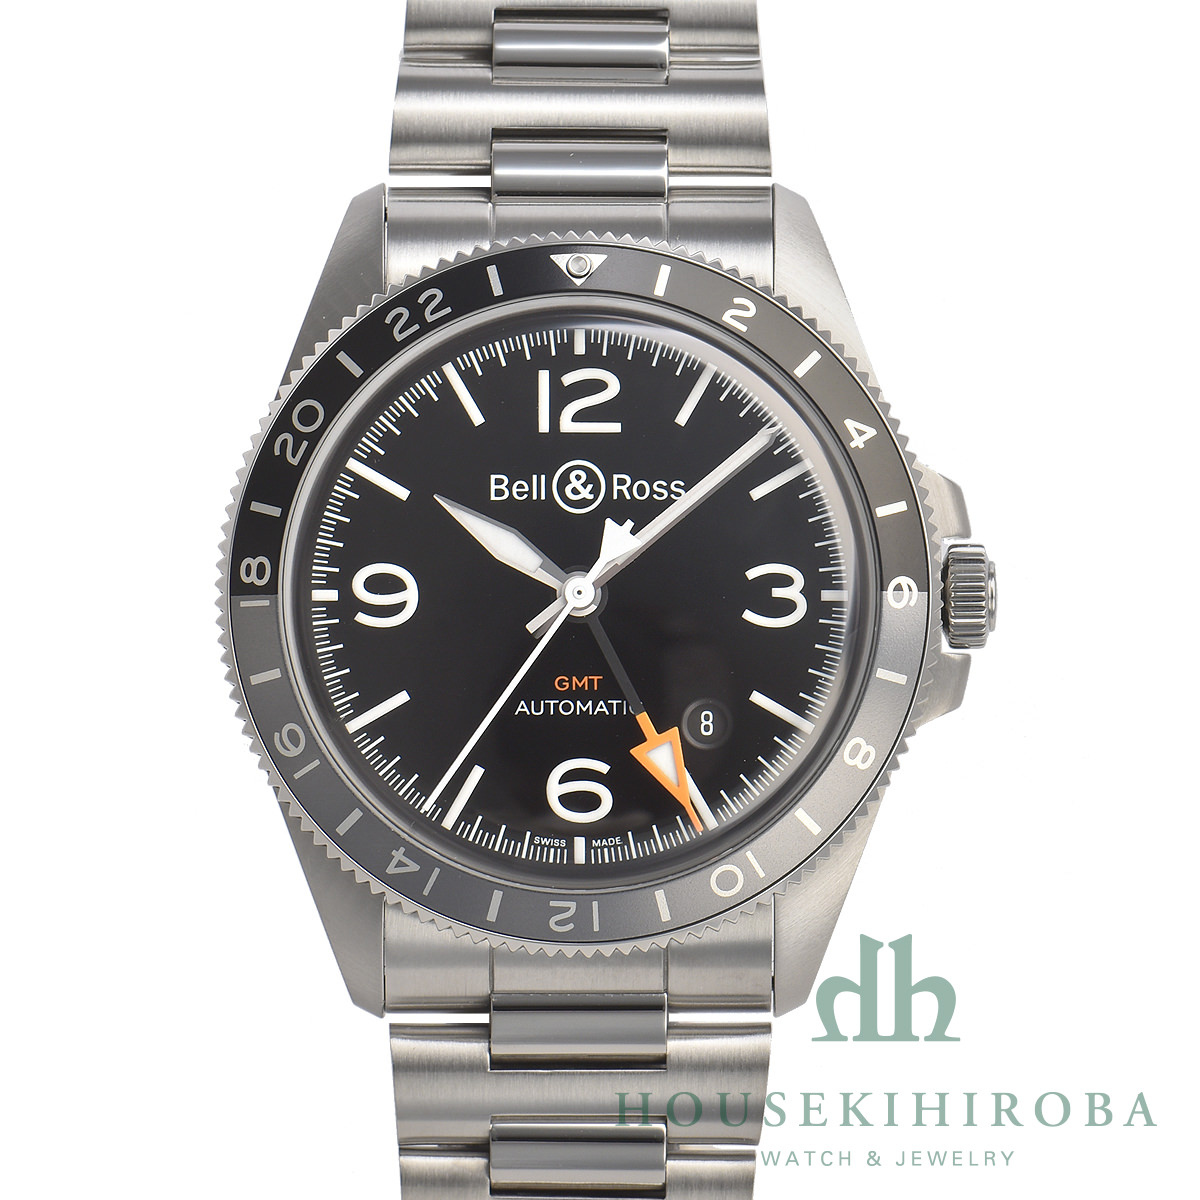 BRV2-93 GMT 24H Automatic